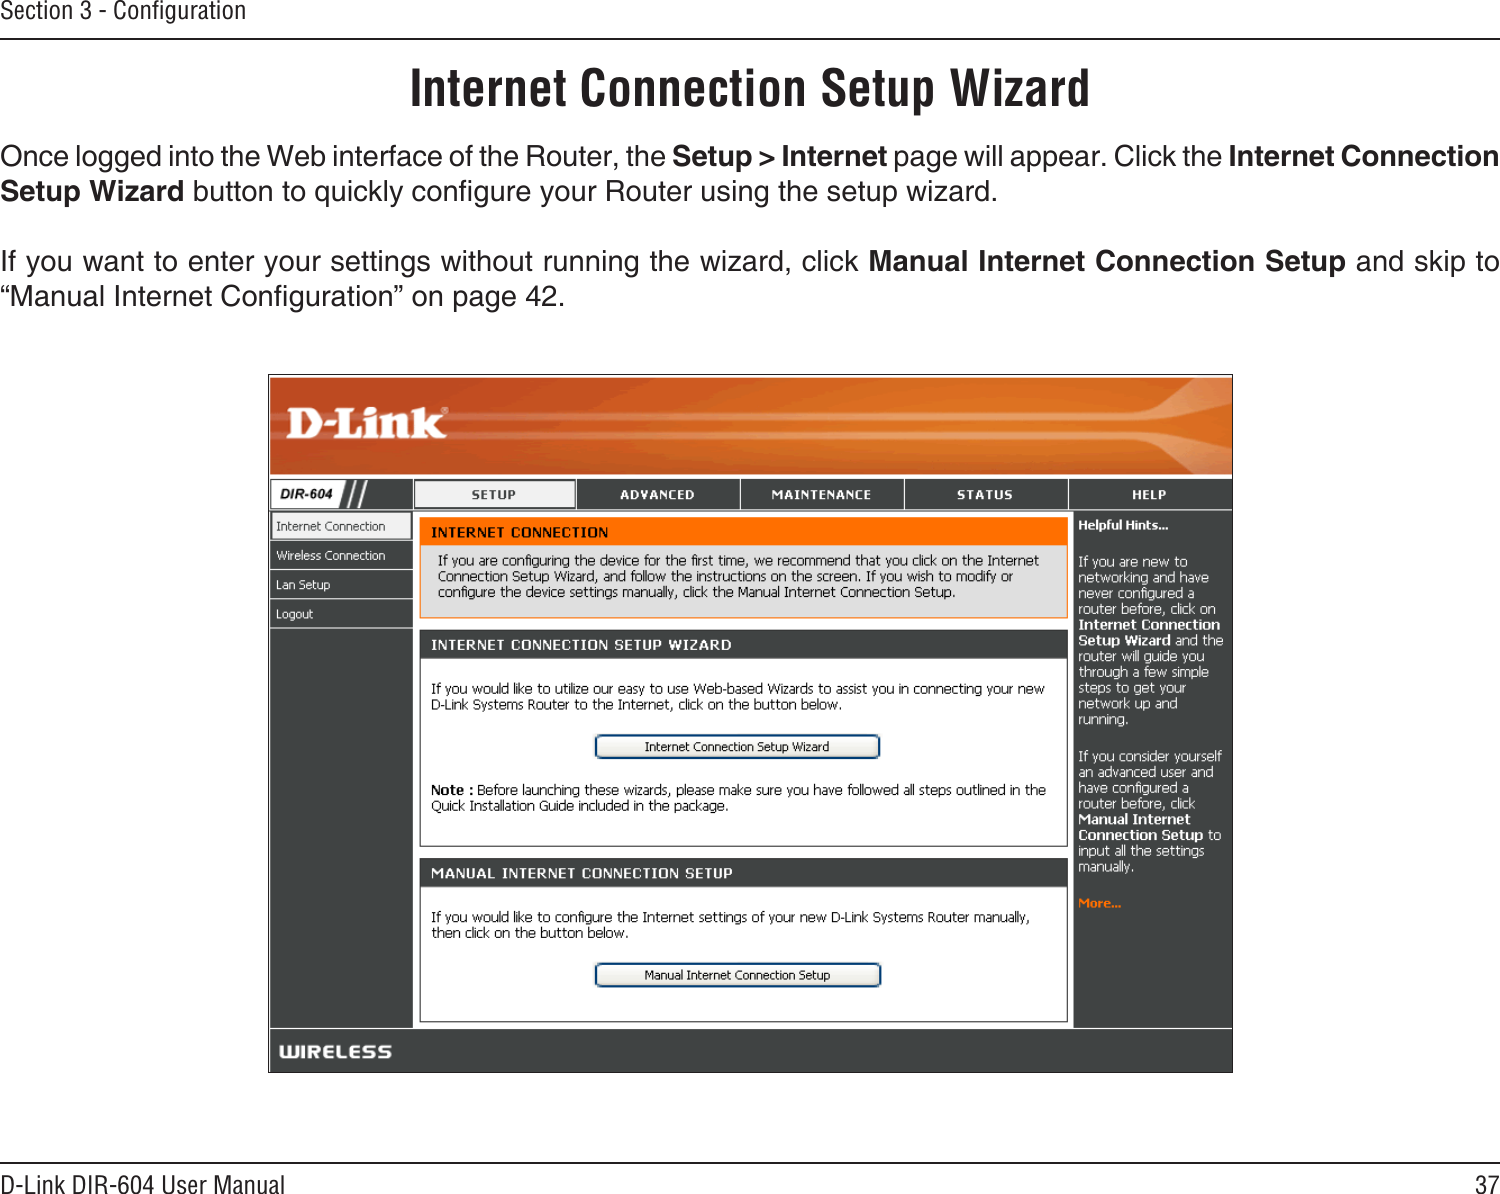 37D-Link DIR-604 User ManualSection 3 - ConﬁgurationInternet Connection Setup WizardOnce logged into the Web interface of the Router, the Setup &gt; Internet page will appear. Click the Internet Connection Setup Wizard button to quickly congure your Router using the setup wizard.If you want to enter your settings without running the wizard, click Manual Internet Connection Setup and skip to “Manual Internet Conguration” on page 42.